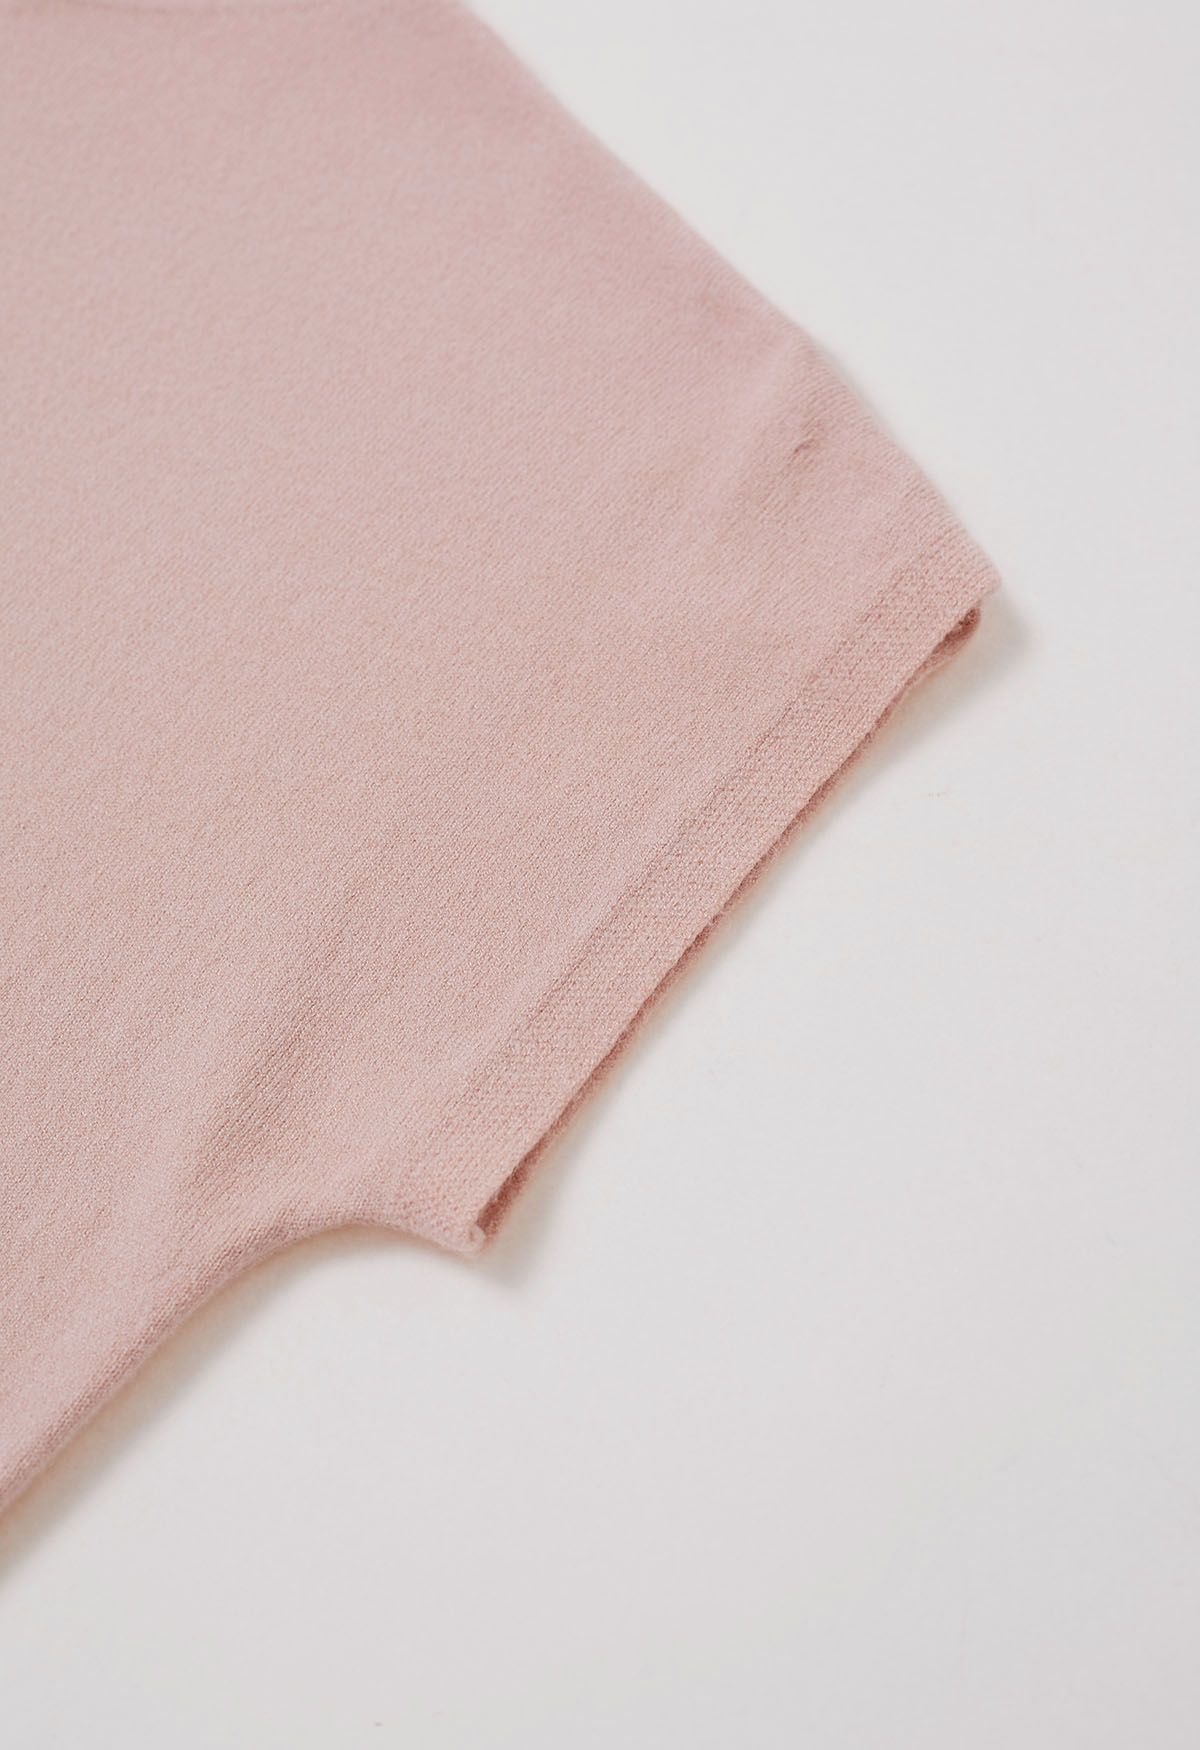 Solid Color Cap Sleeves Knit Top in Pink